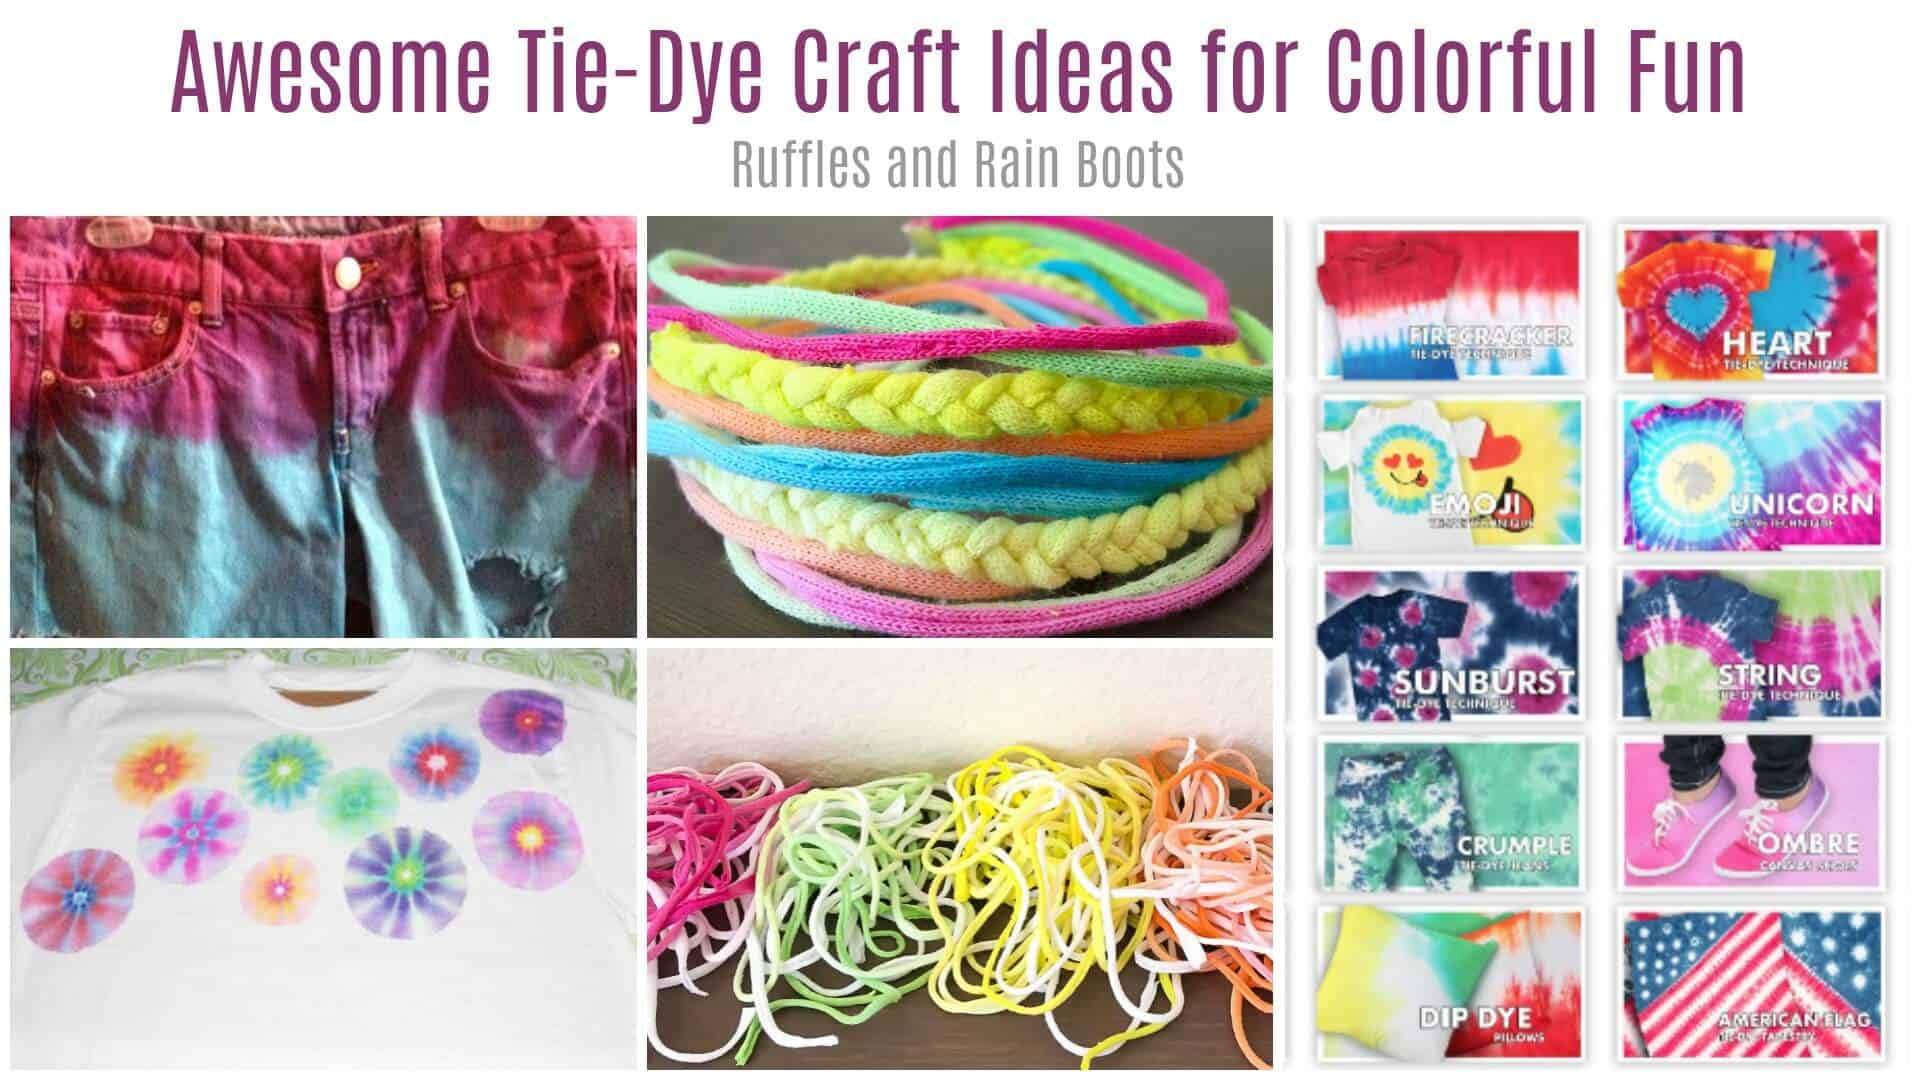 Tie Dye Craft Ideas for Colorful Science Fun